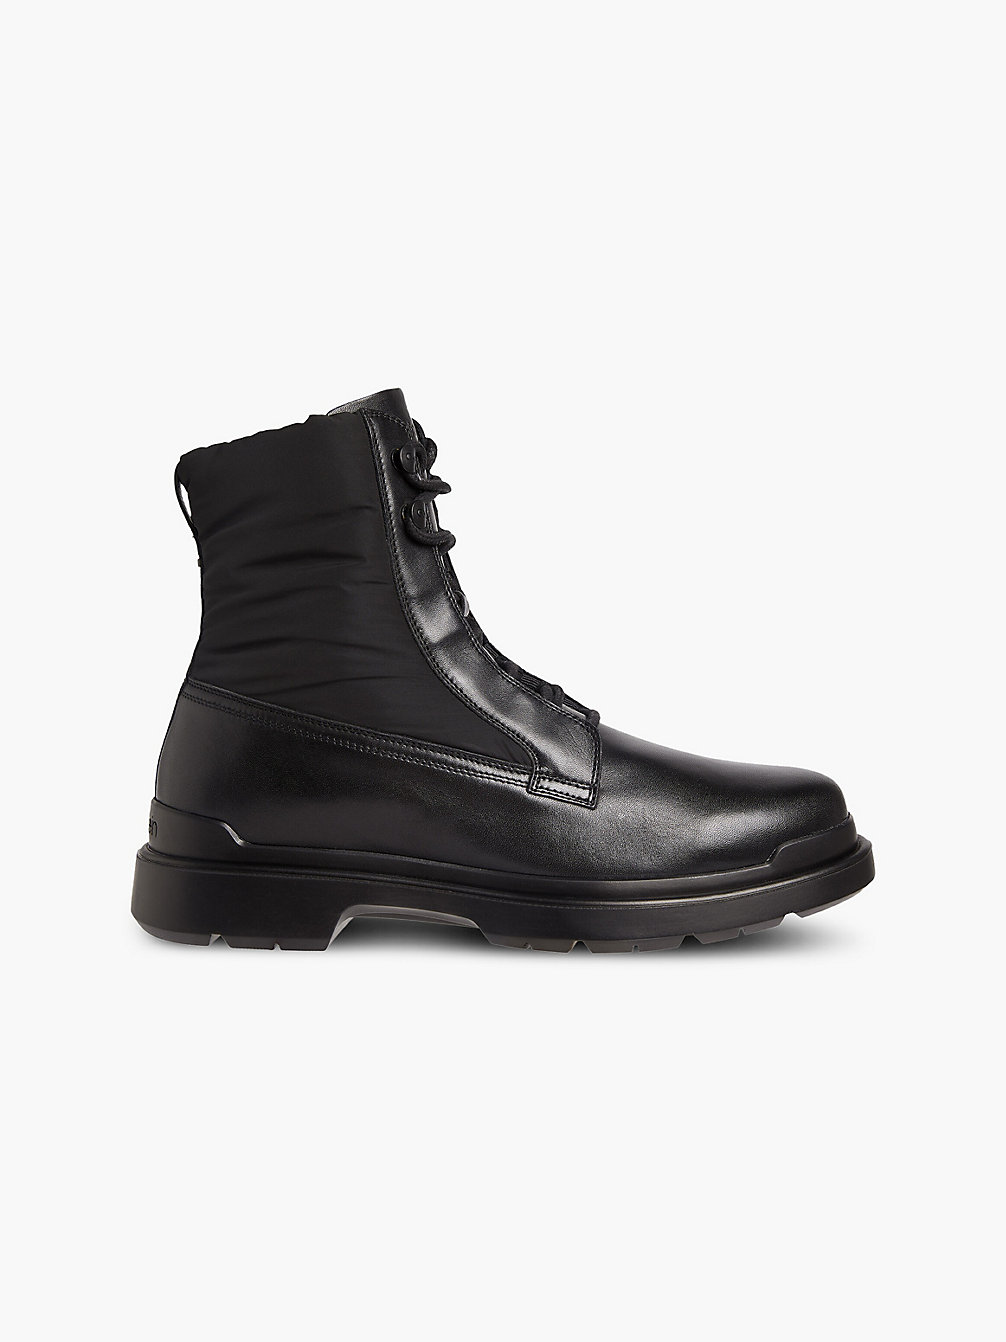 PVH BLACK Leather And Recycled Nylon Boots undefined men Calvin Klein